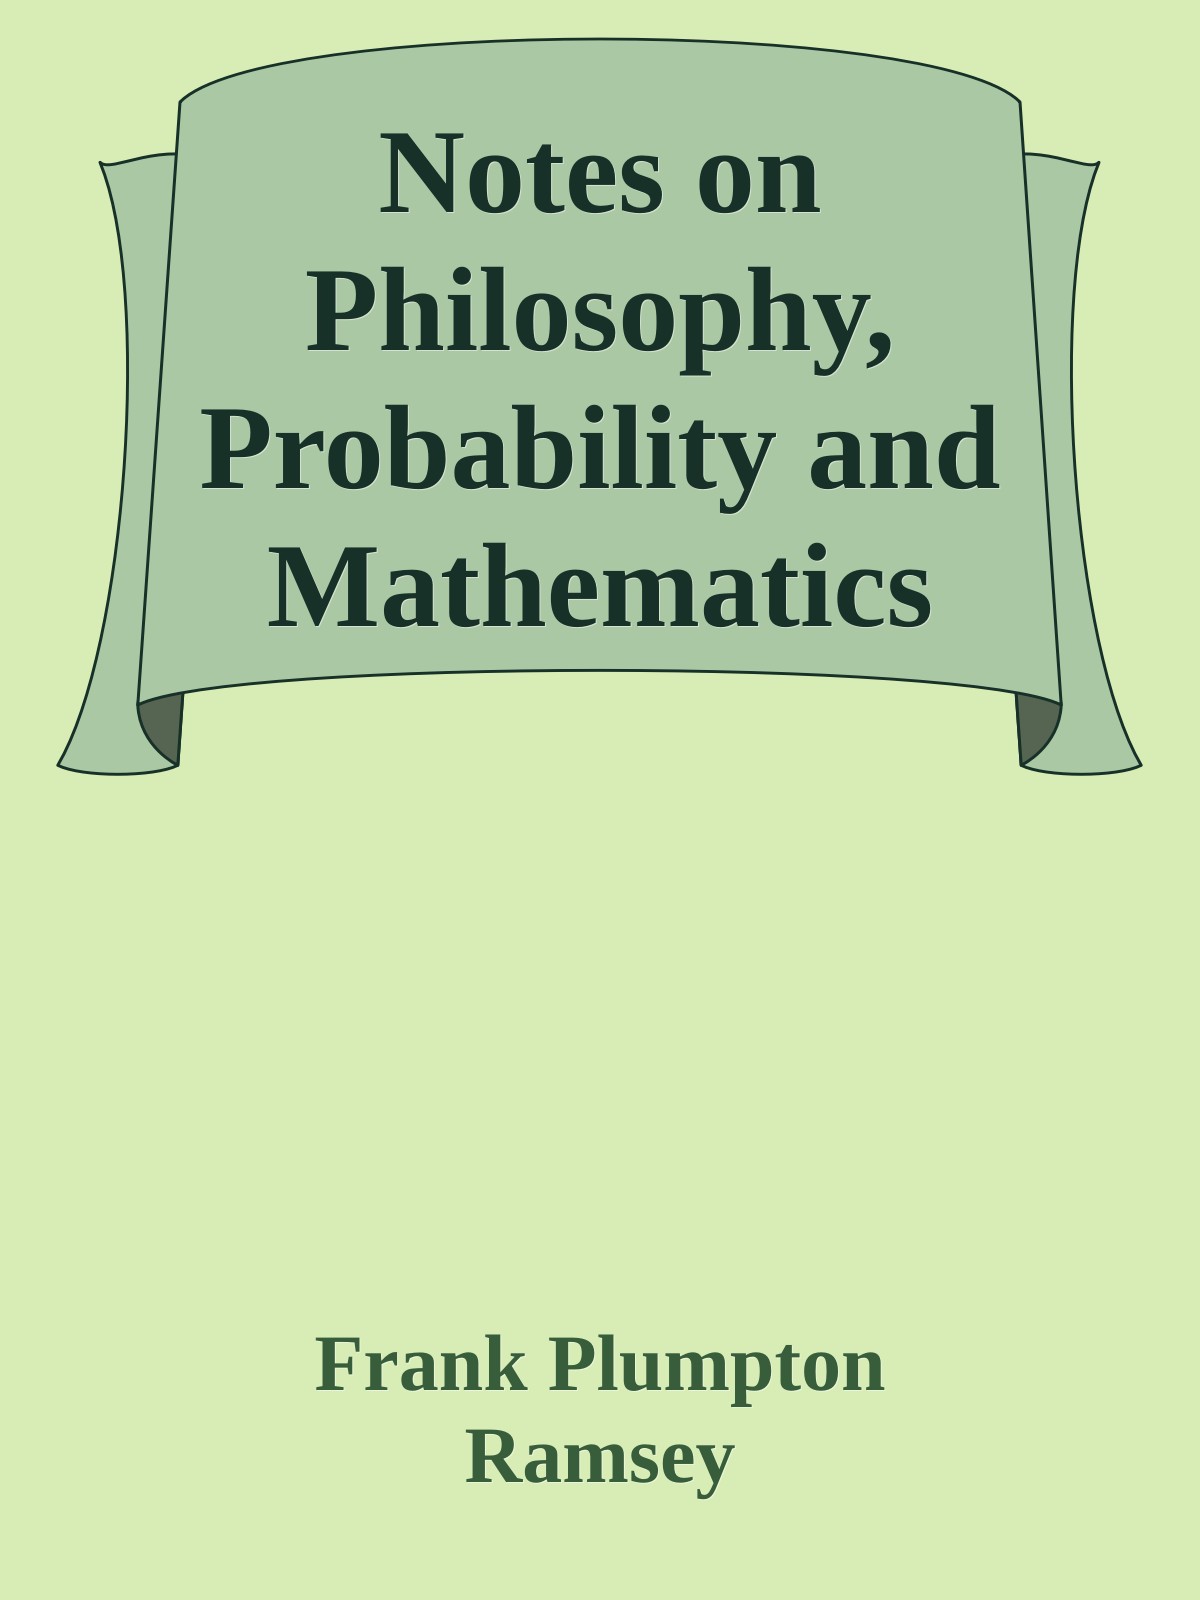 Notes on Philosophy, Probability and Mathematics